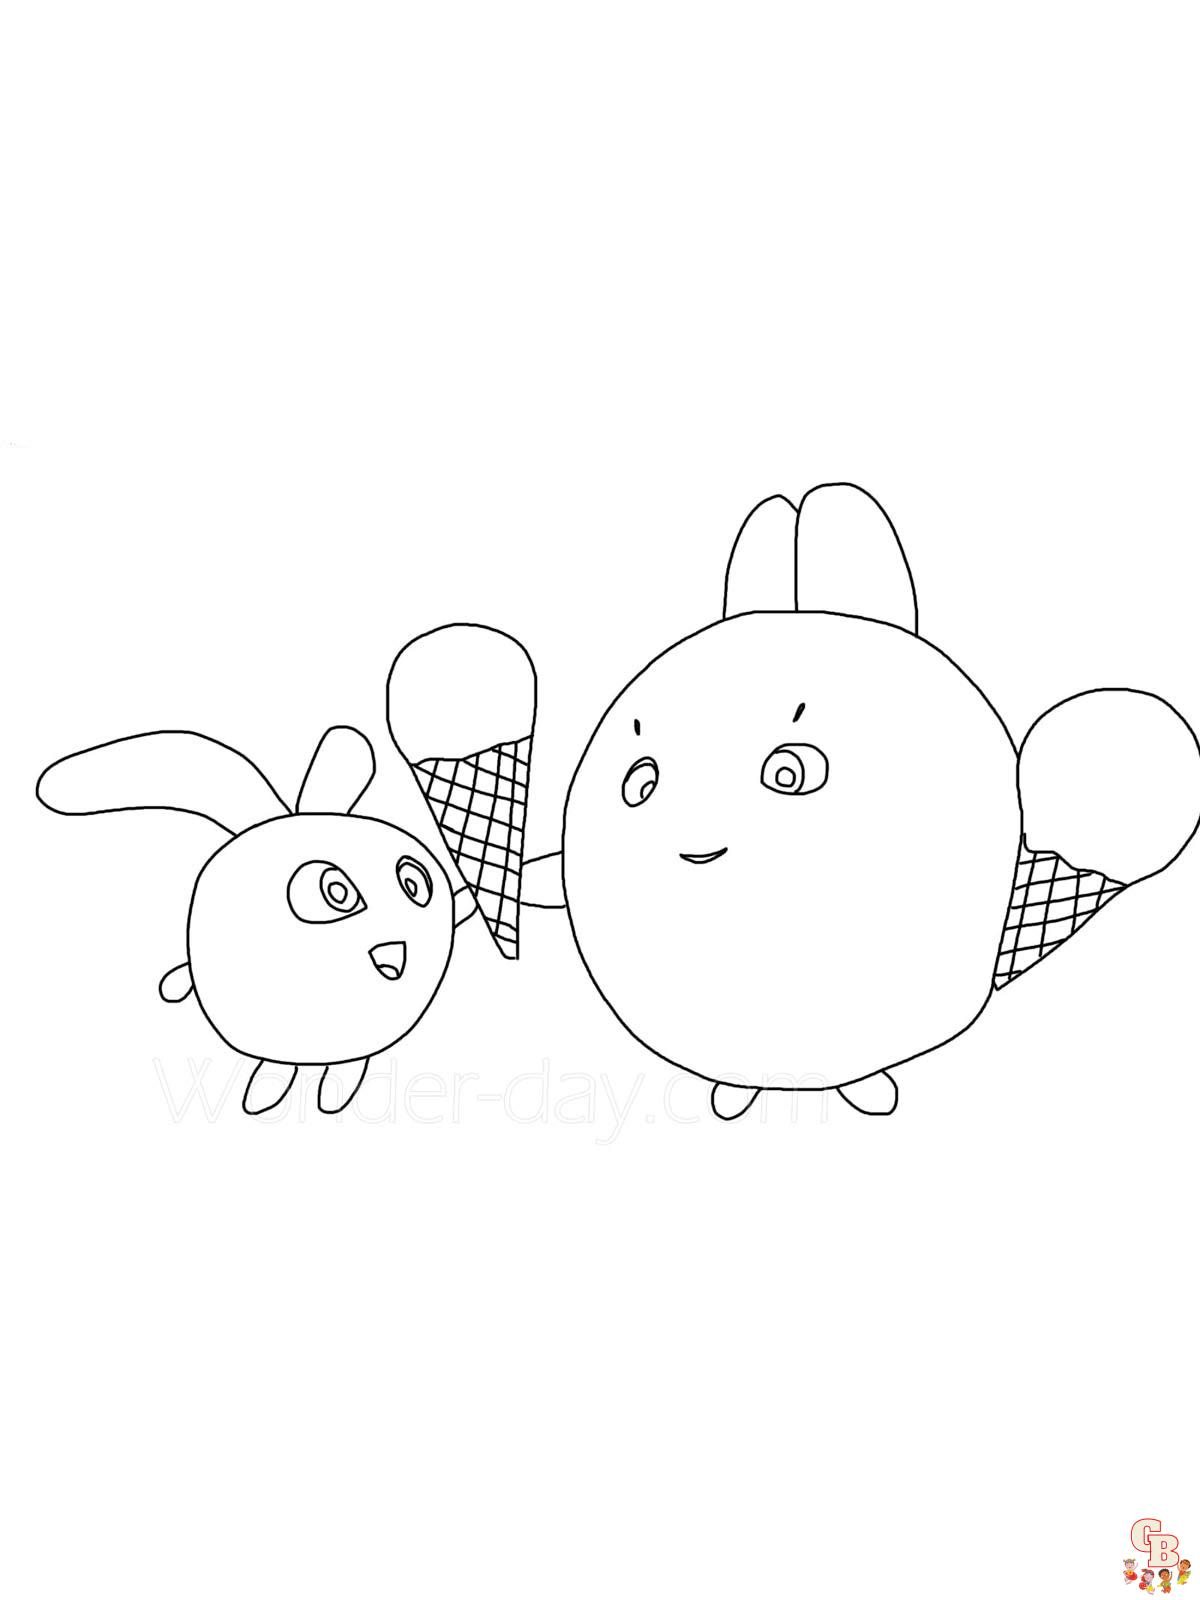 Sunny Bunnies Coloring Pages